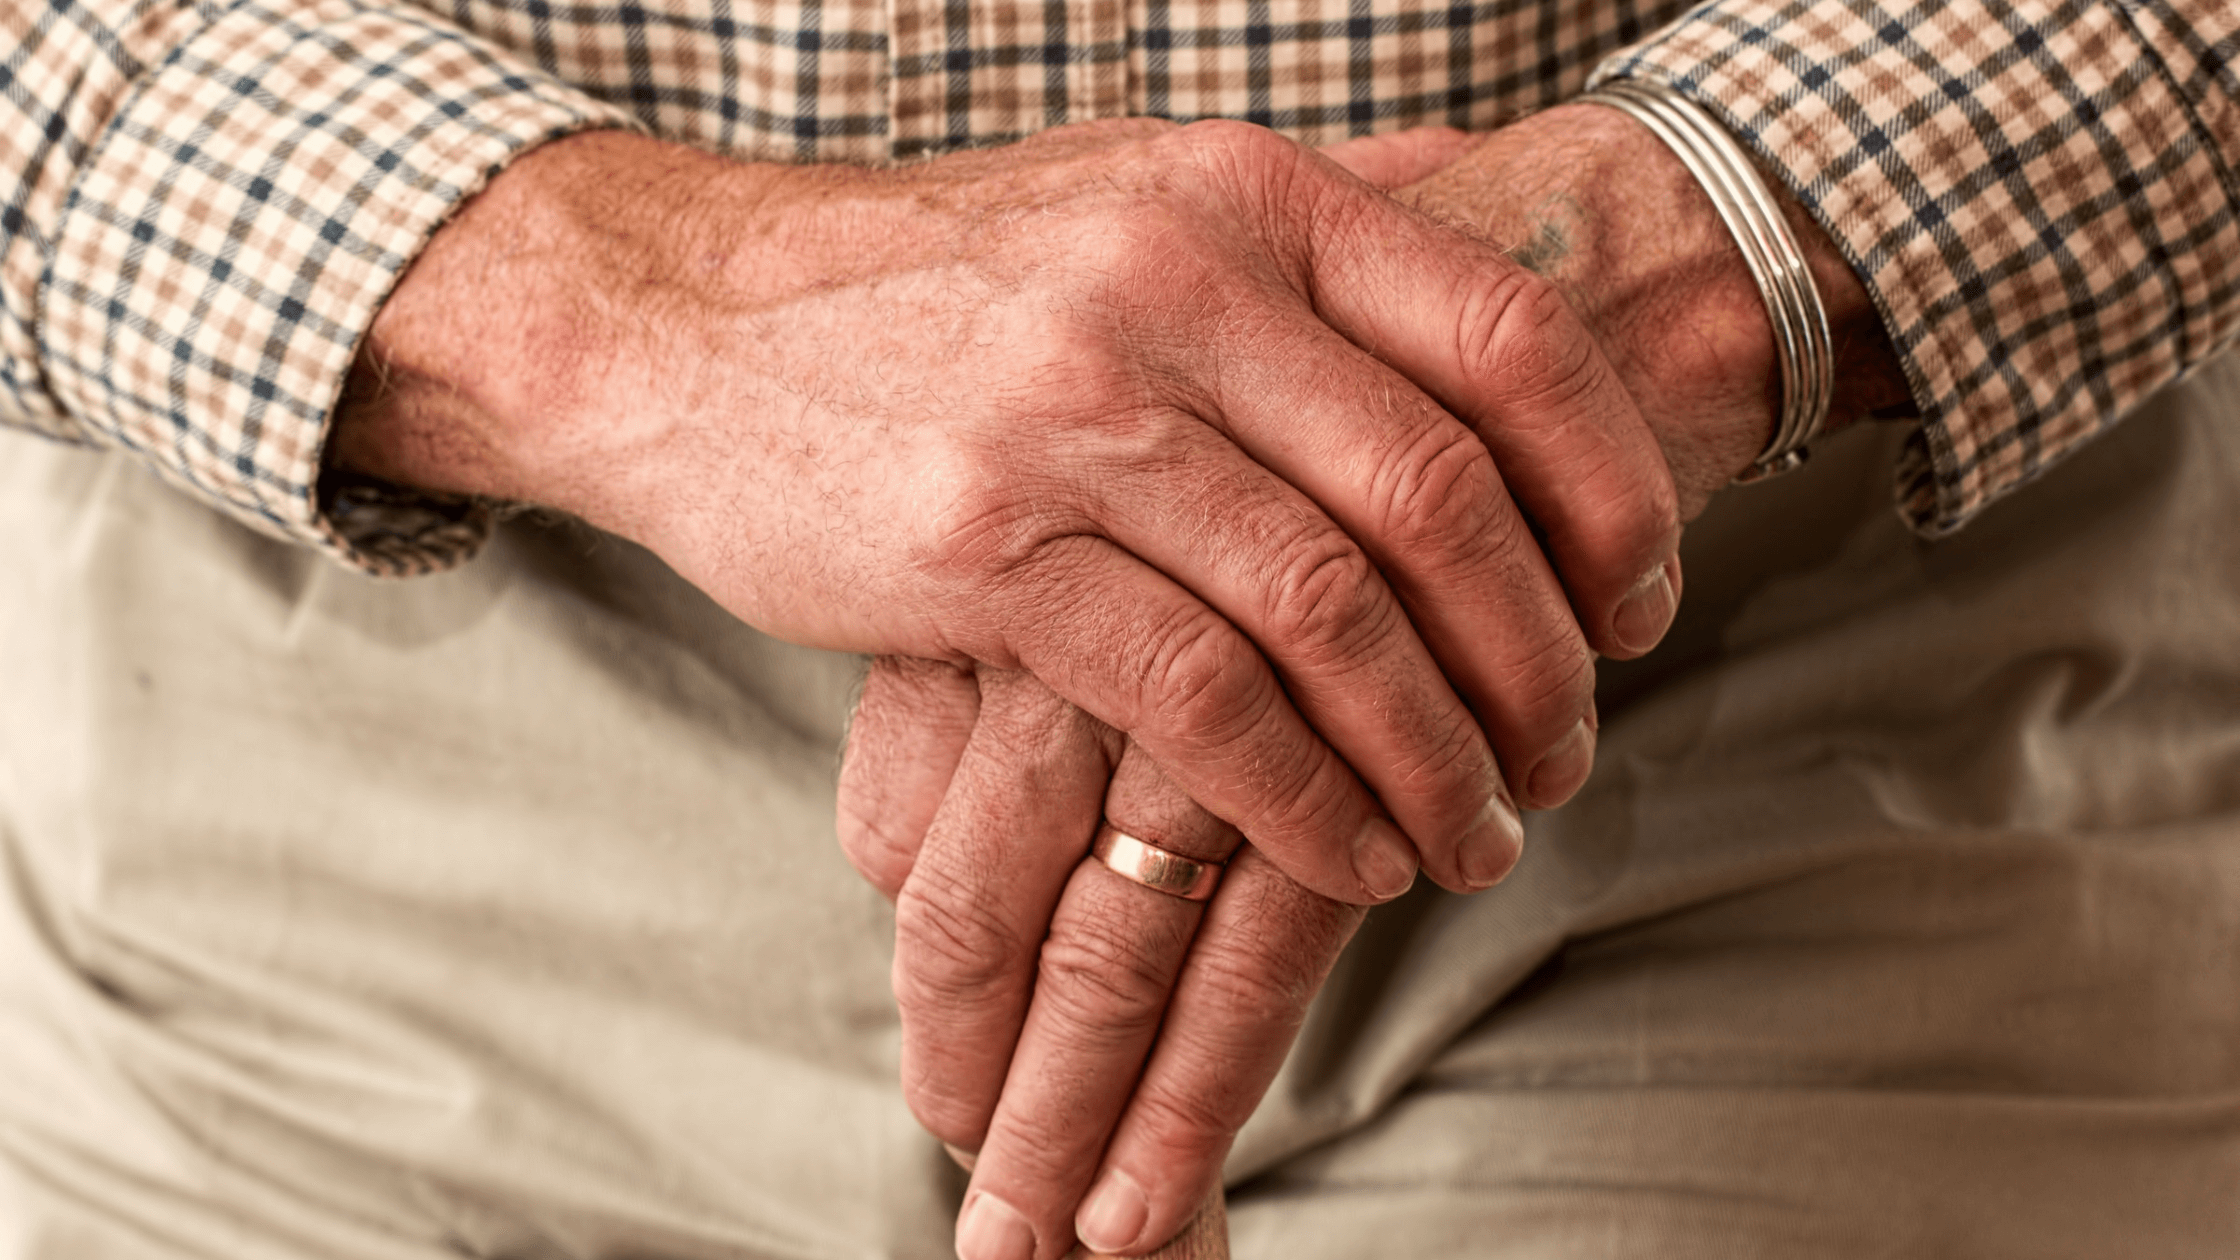 Physical Therapy For Parkinson's: Promoting Safety and Independence